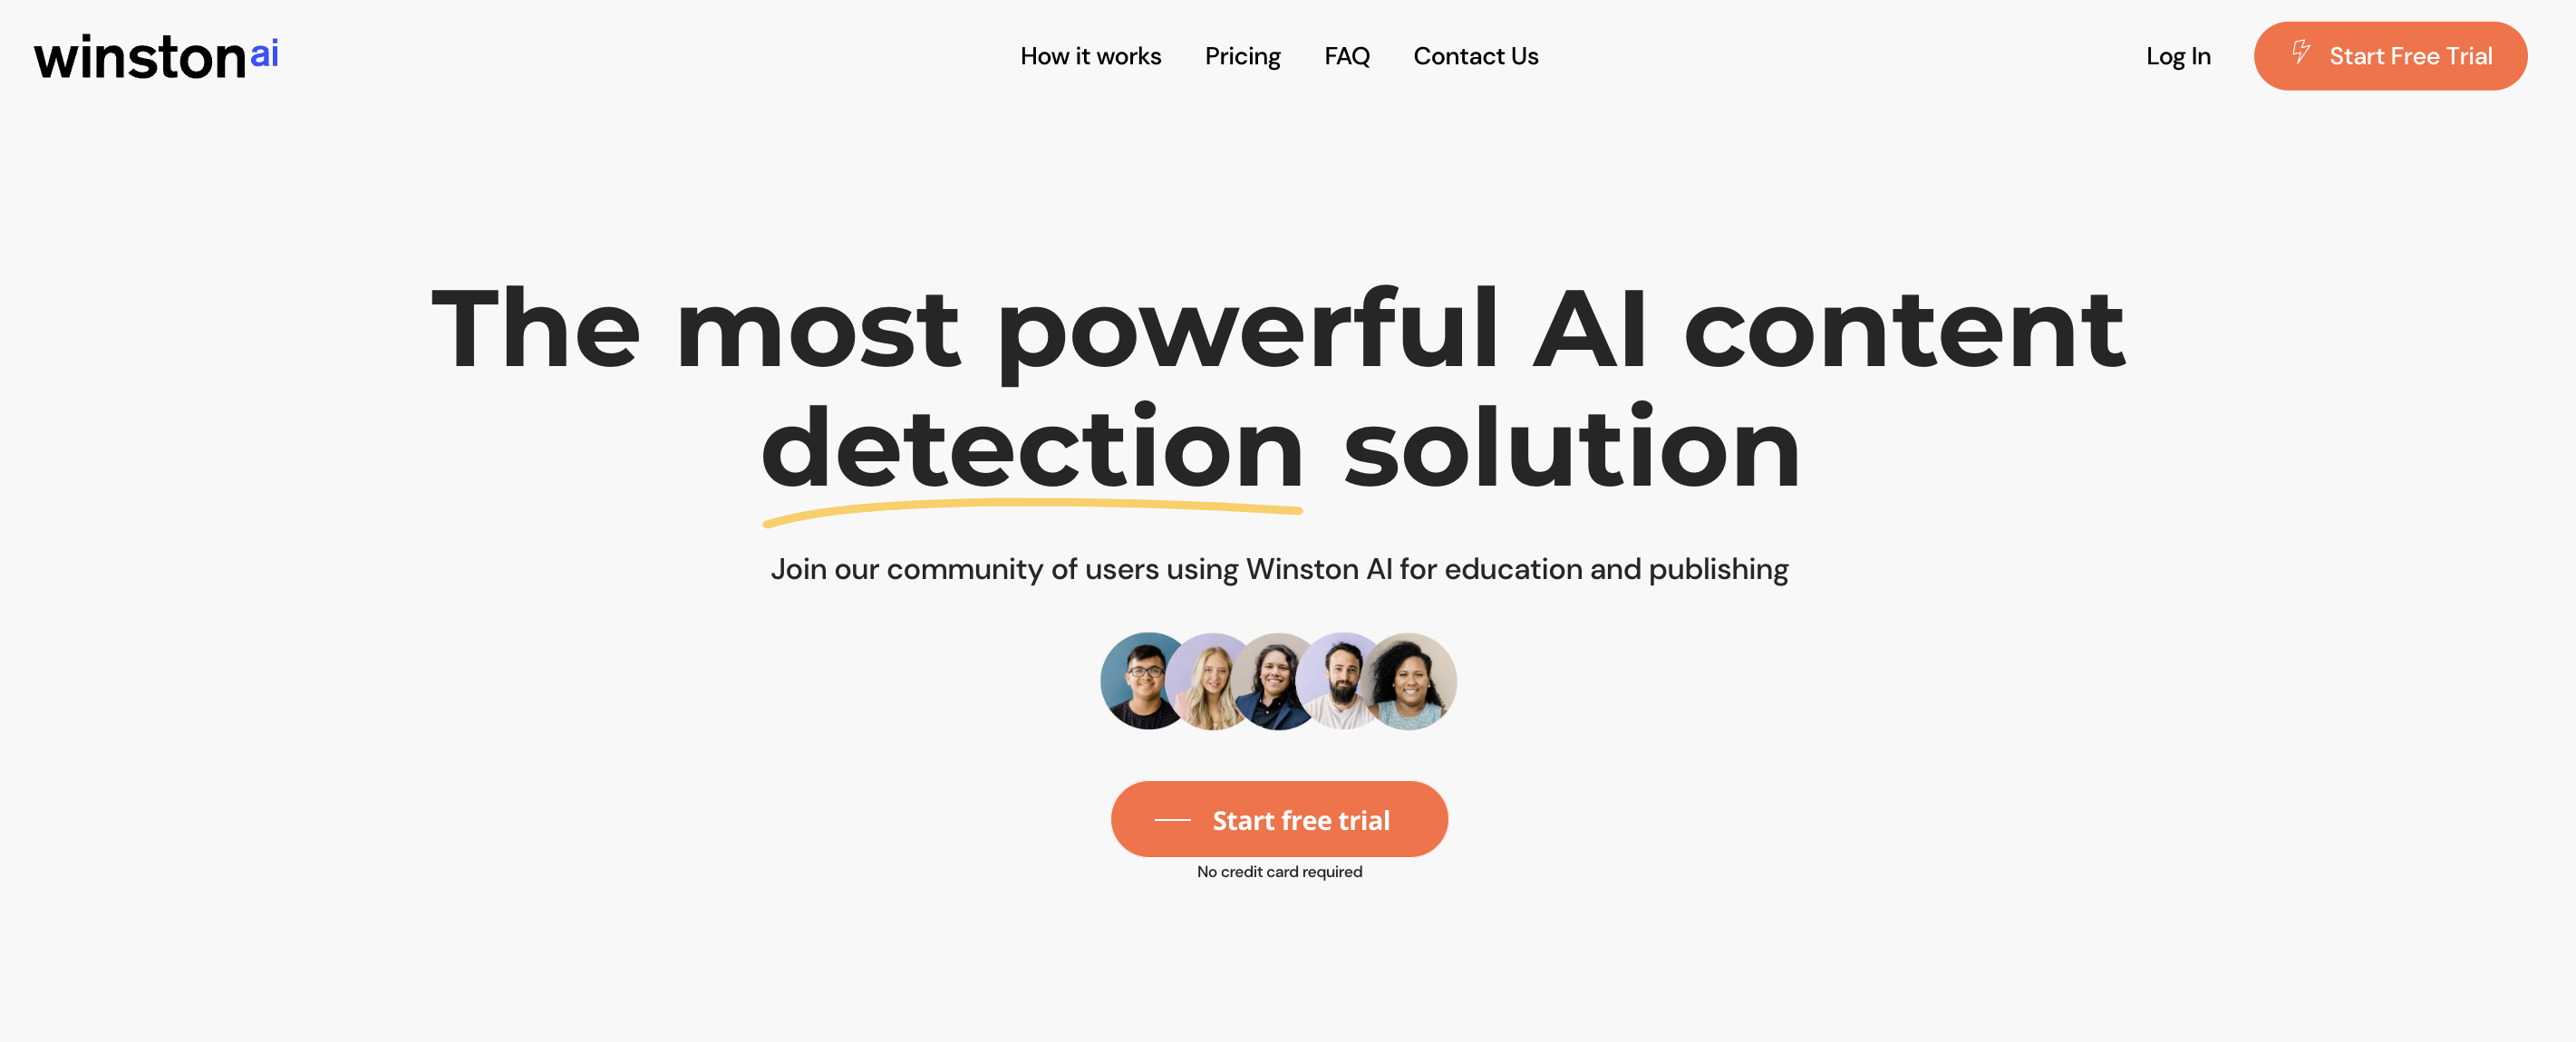 Winston AI - The essential AI content detection solution for education